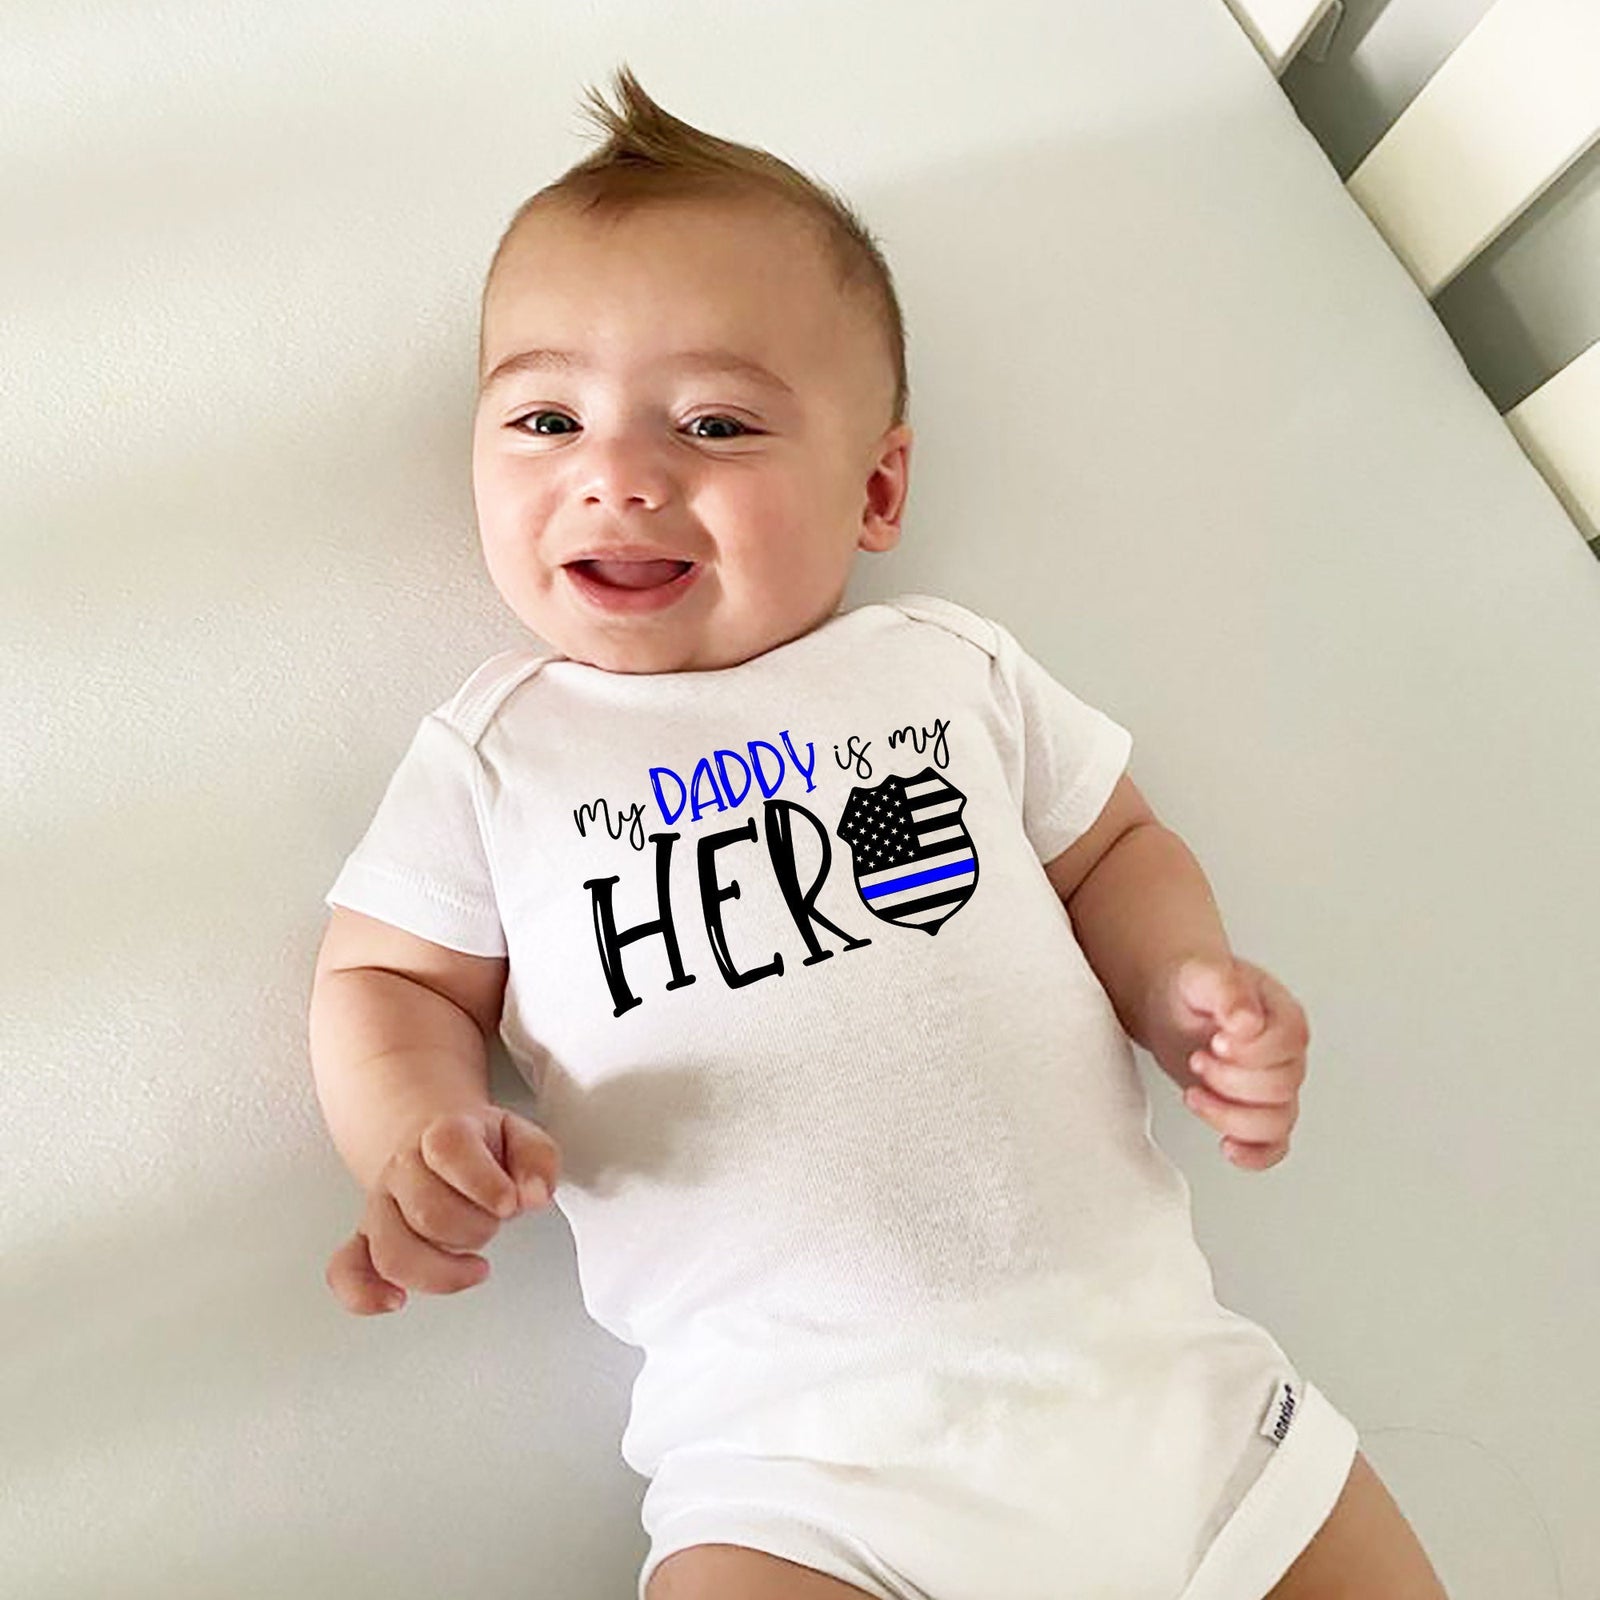 My Daddy is my Hero Onesie - Police Officer Baby Onesie - Front Line Dad Onesie - Police Officer Baby Gift